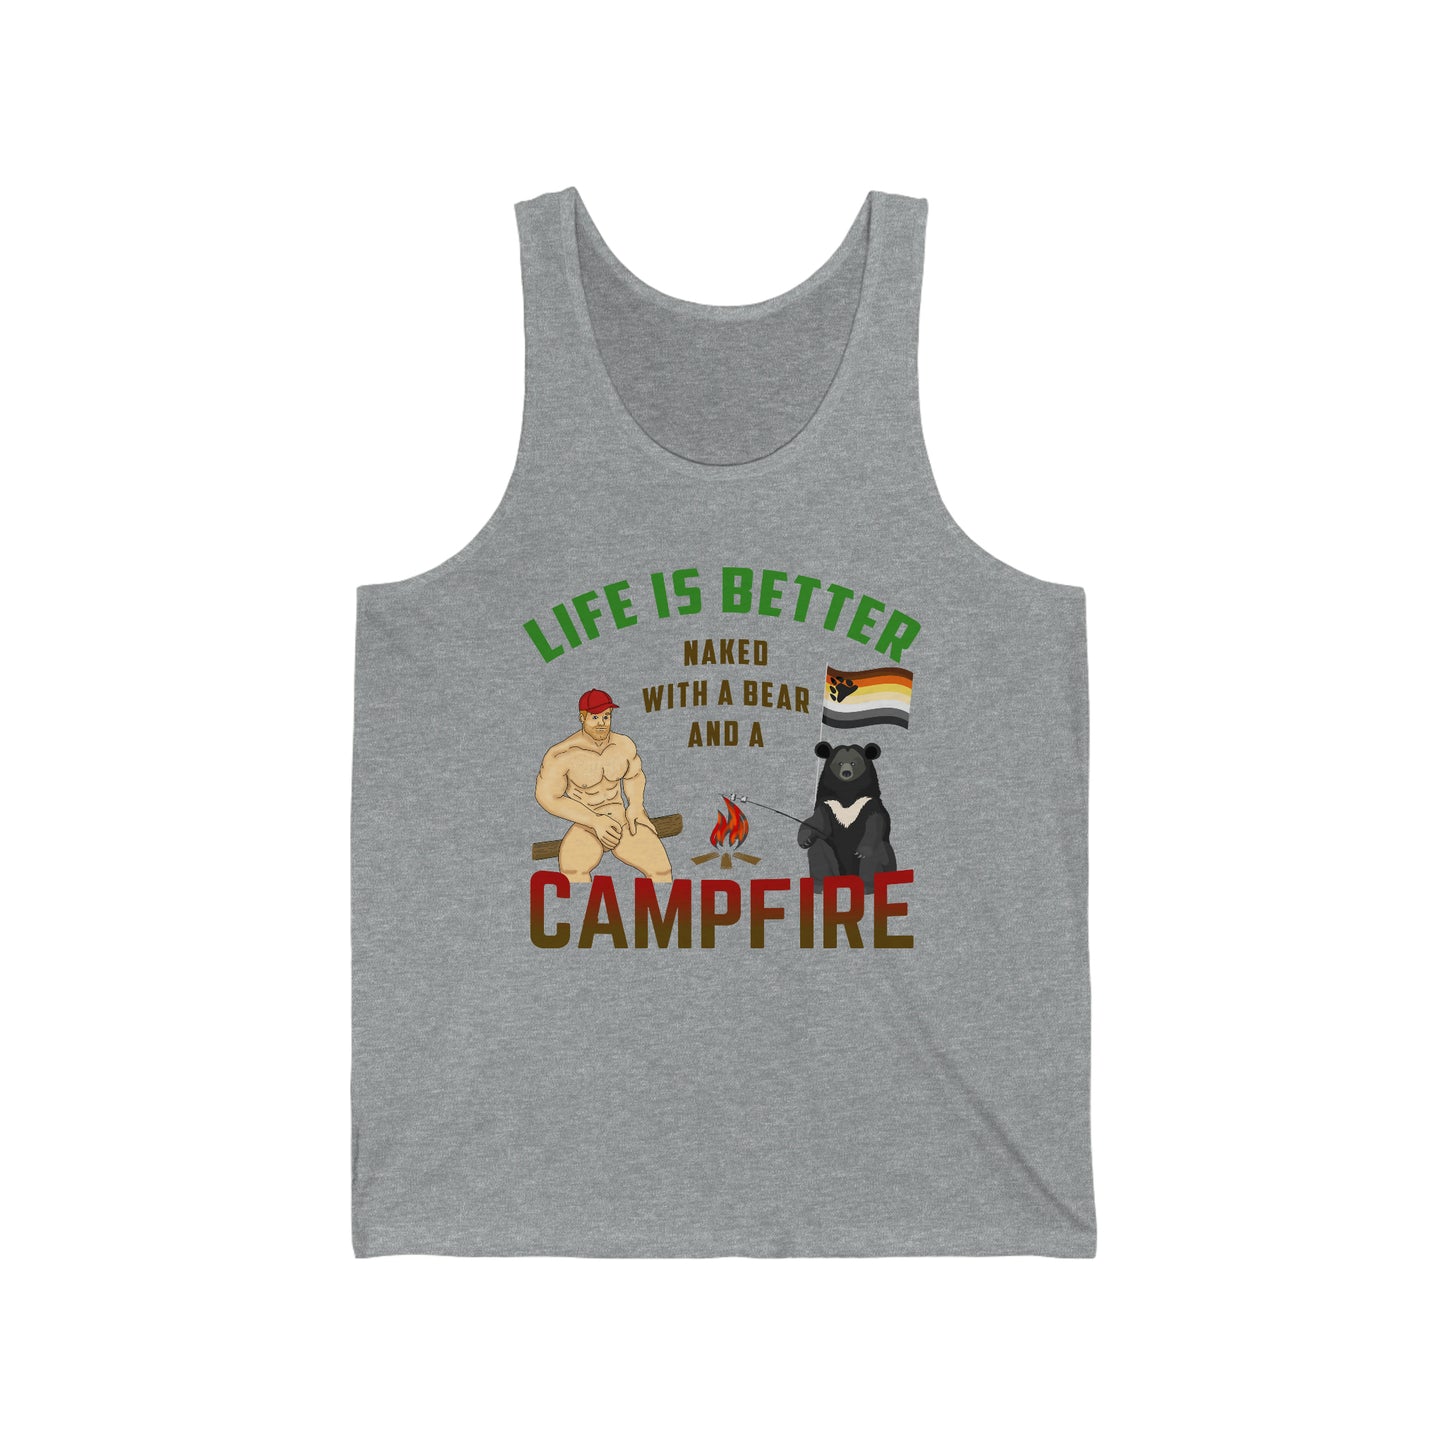 Life is Better Naked with a Bear and a Campfire Adult Unisex Tank Top